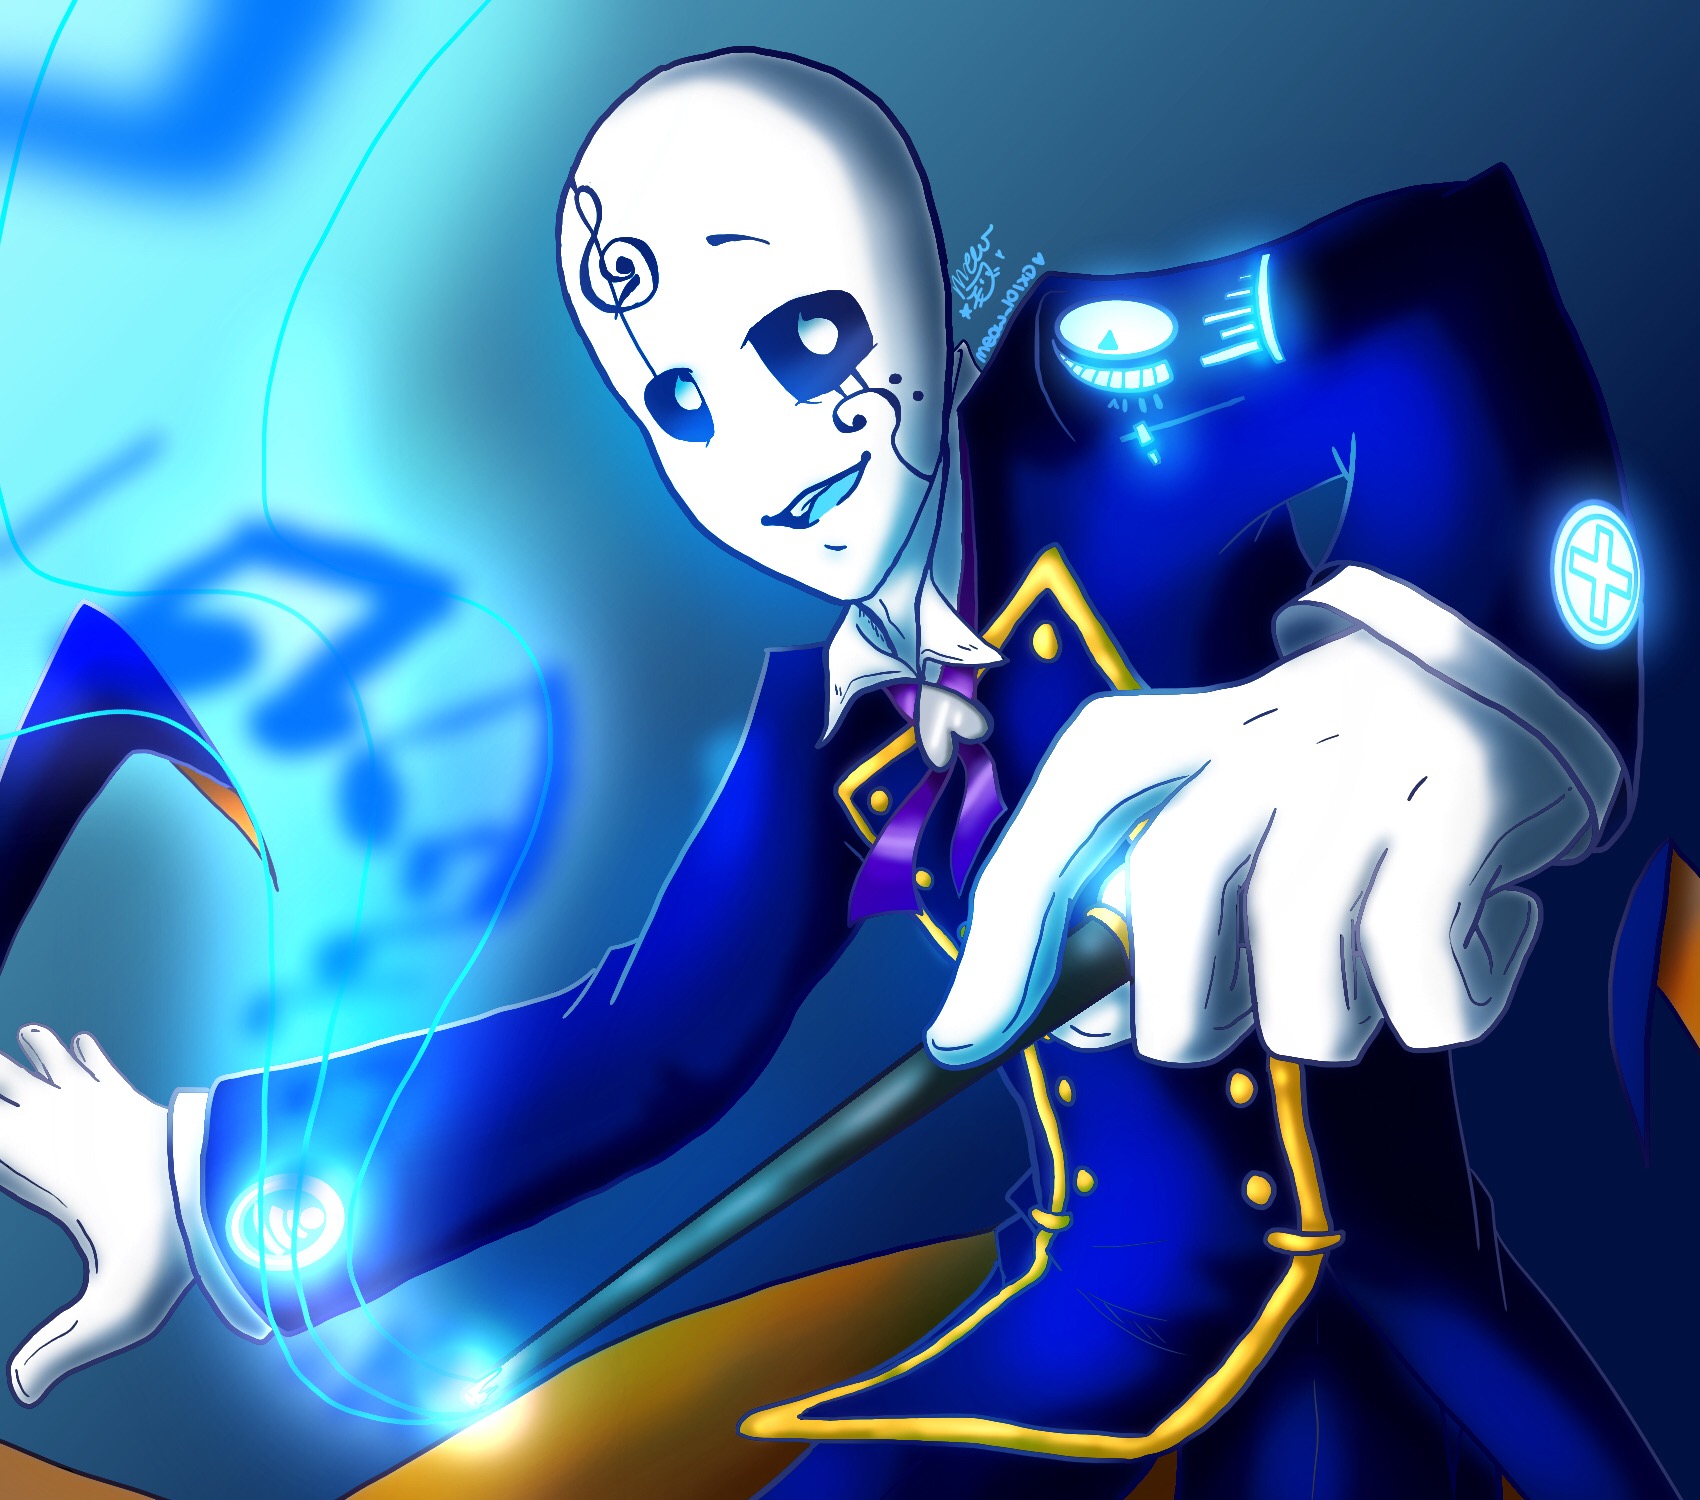 Underbeats Gaster fan art~ also! I do indeed have a few...